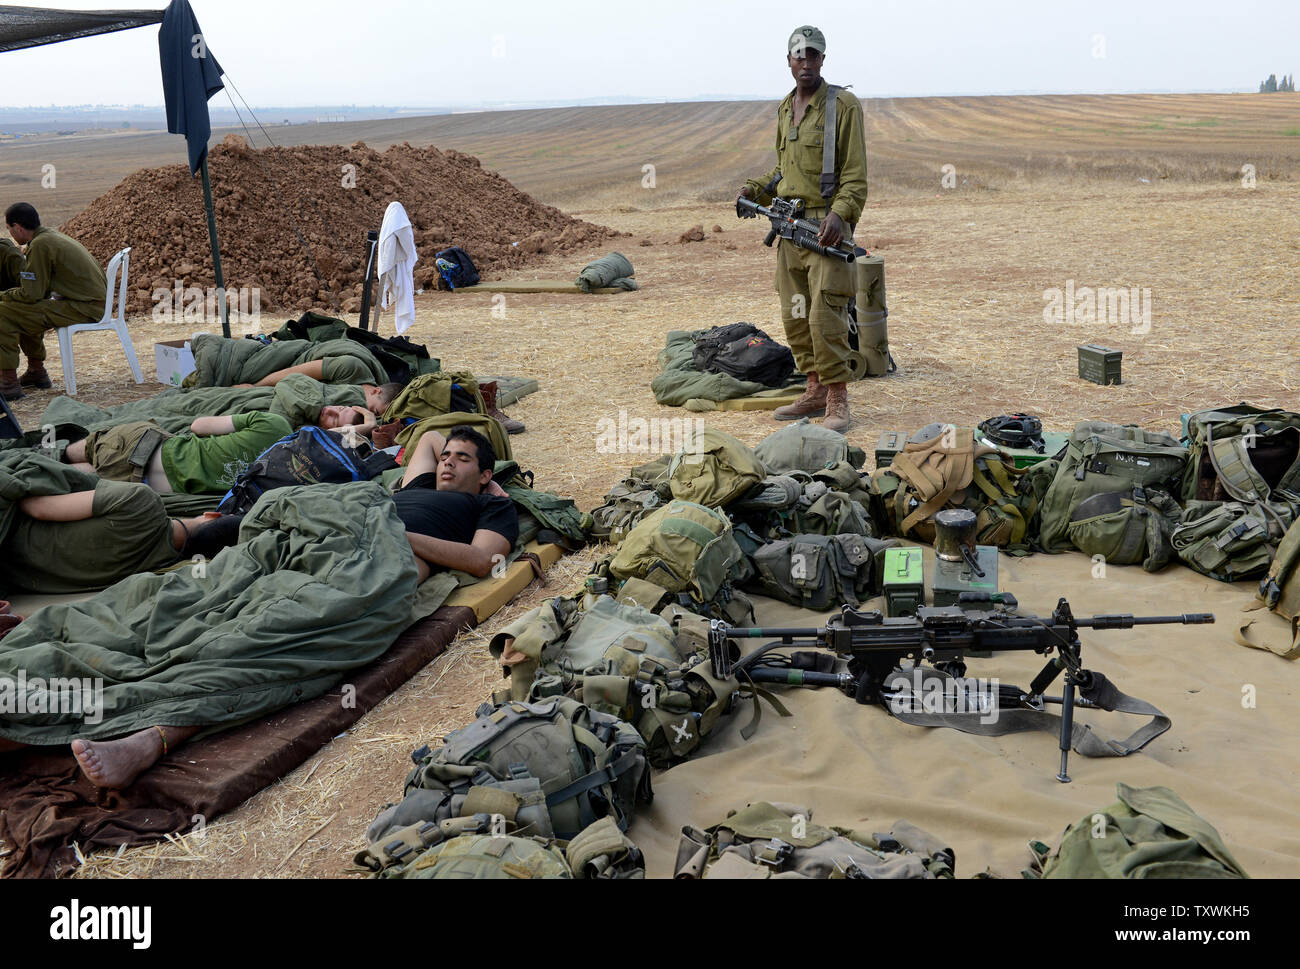 Israeli soldiers sleep at a staging area at an unspecified  location near the Israeli border with the Gaza Strip in southern Israel,  July 28, 2014.  Fighting between Israel and Hamas was quieter on the first day of the Muslim holiday of Eid Al Fitr, after pressure from the UN Security Council and US President Barak Obama for an immediate ceasefire.  UPI/Debbie Hill Stock Photo